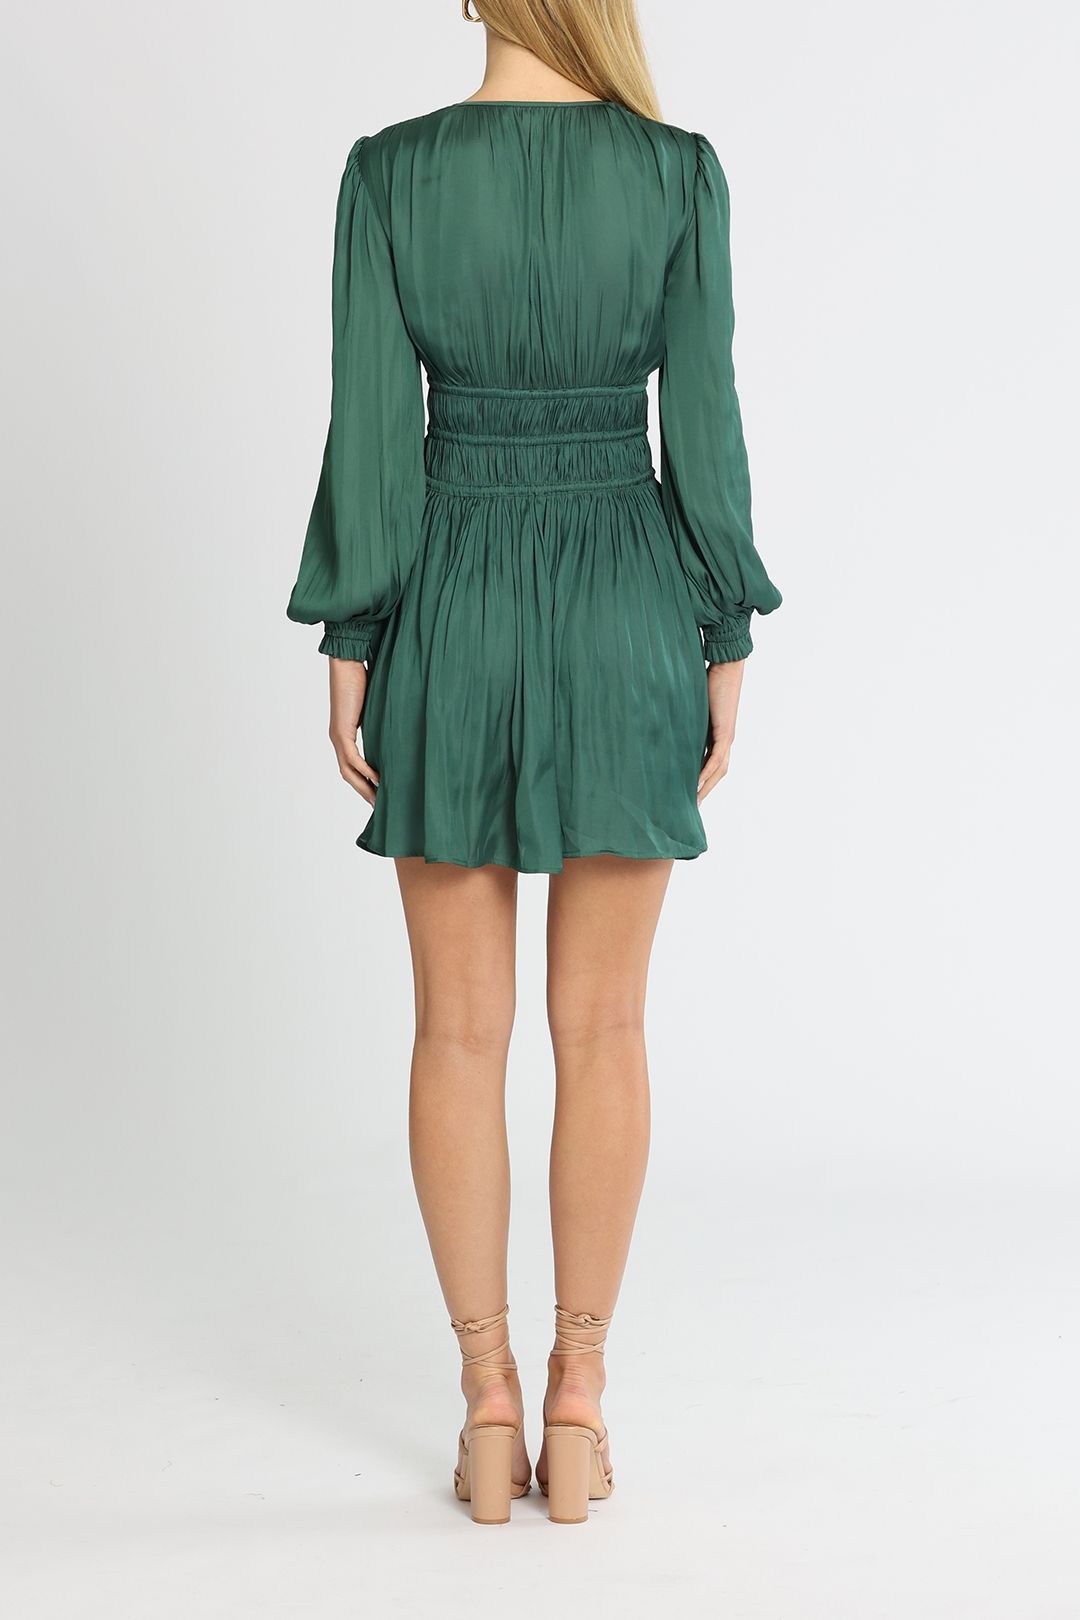 Belle and Bloom Shine Bright Ruched Mini Dress Green Long Sleeves